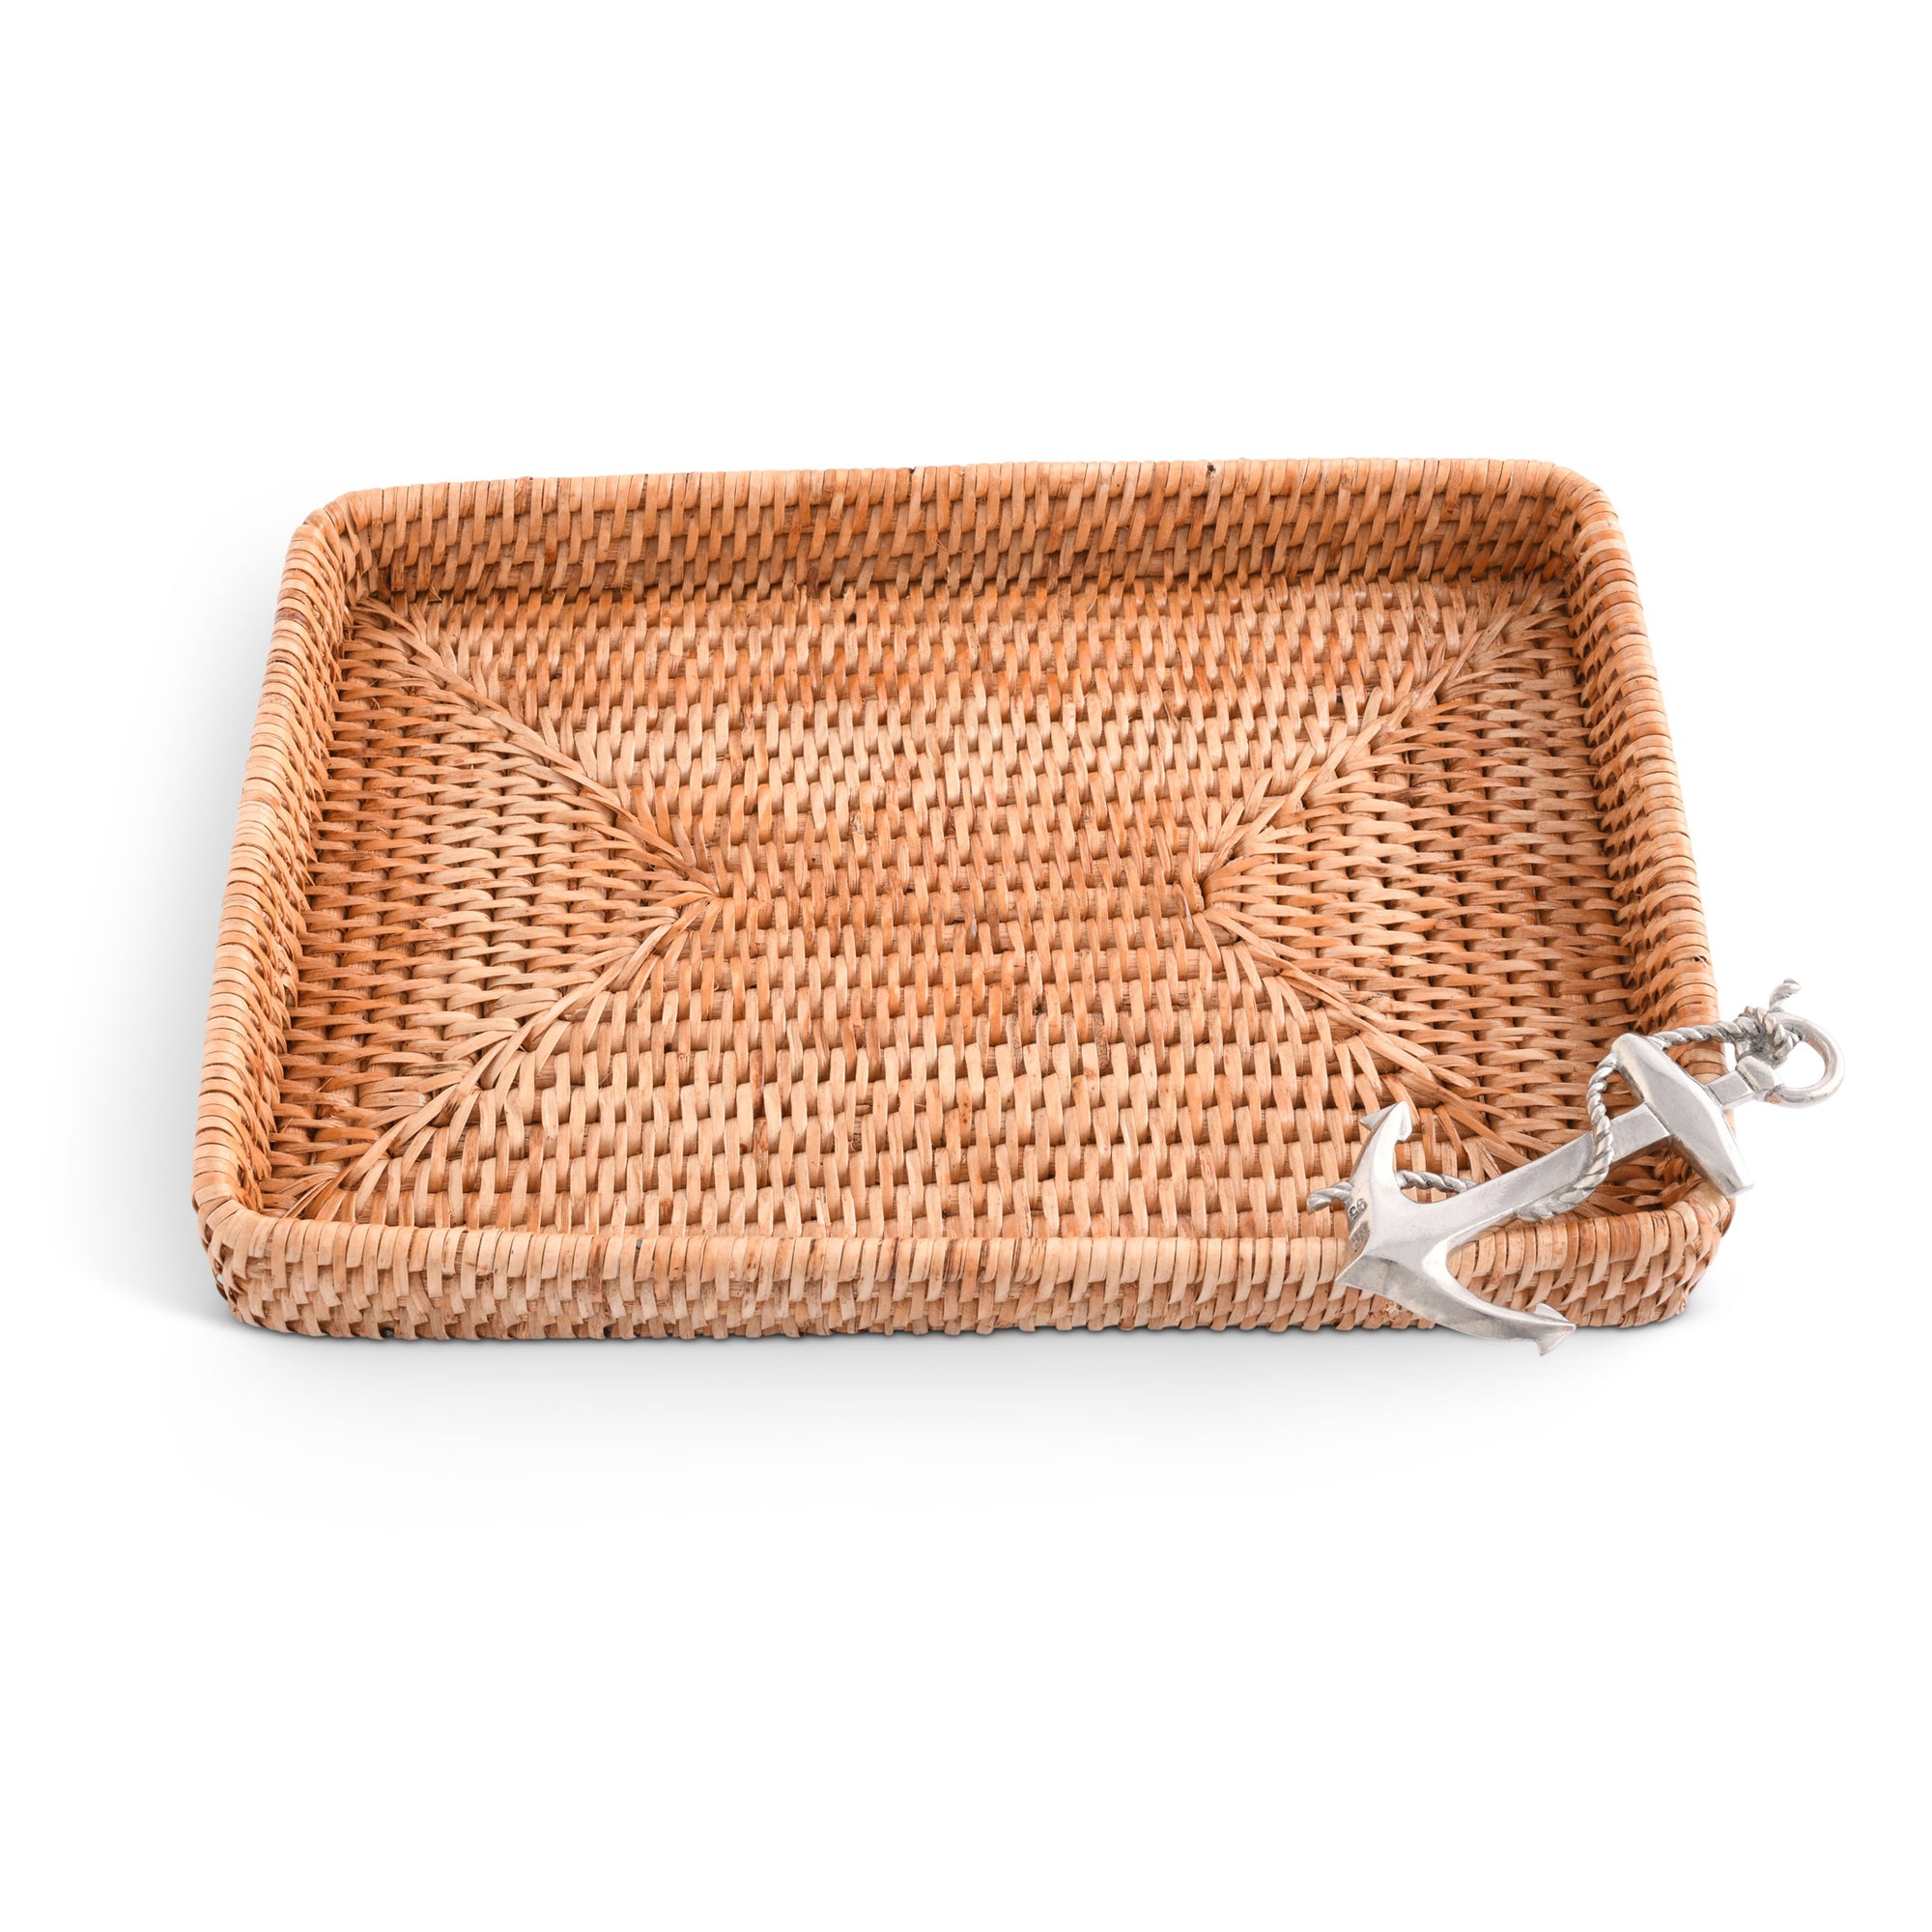 Vagabond House Anchor Catchall Tray Hand Woven Wicker Rattan Product Image